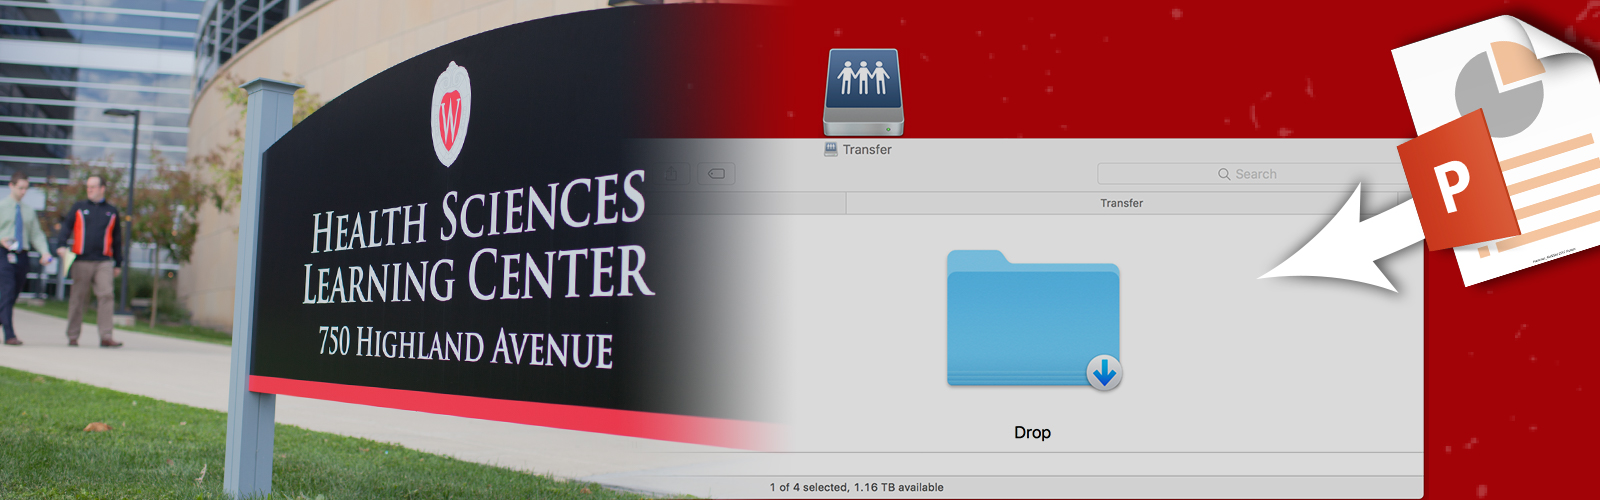 Hero image for 'File Transfer':File on desktop being uploaded to server, also showing entrance to physical office.